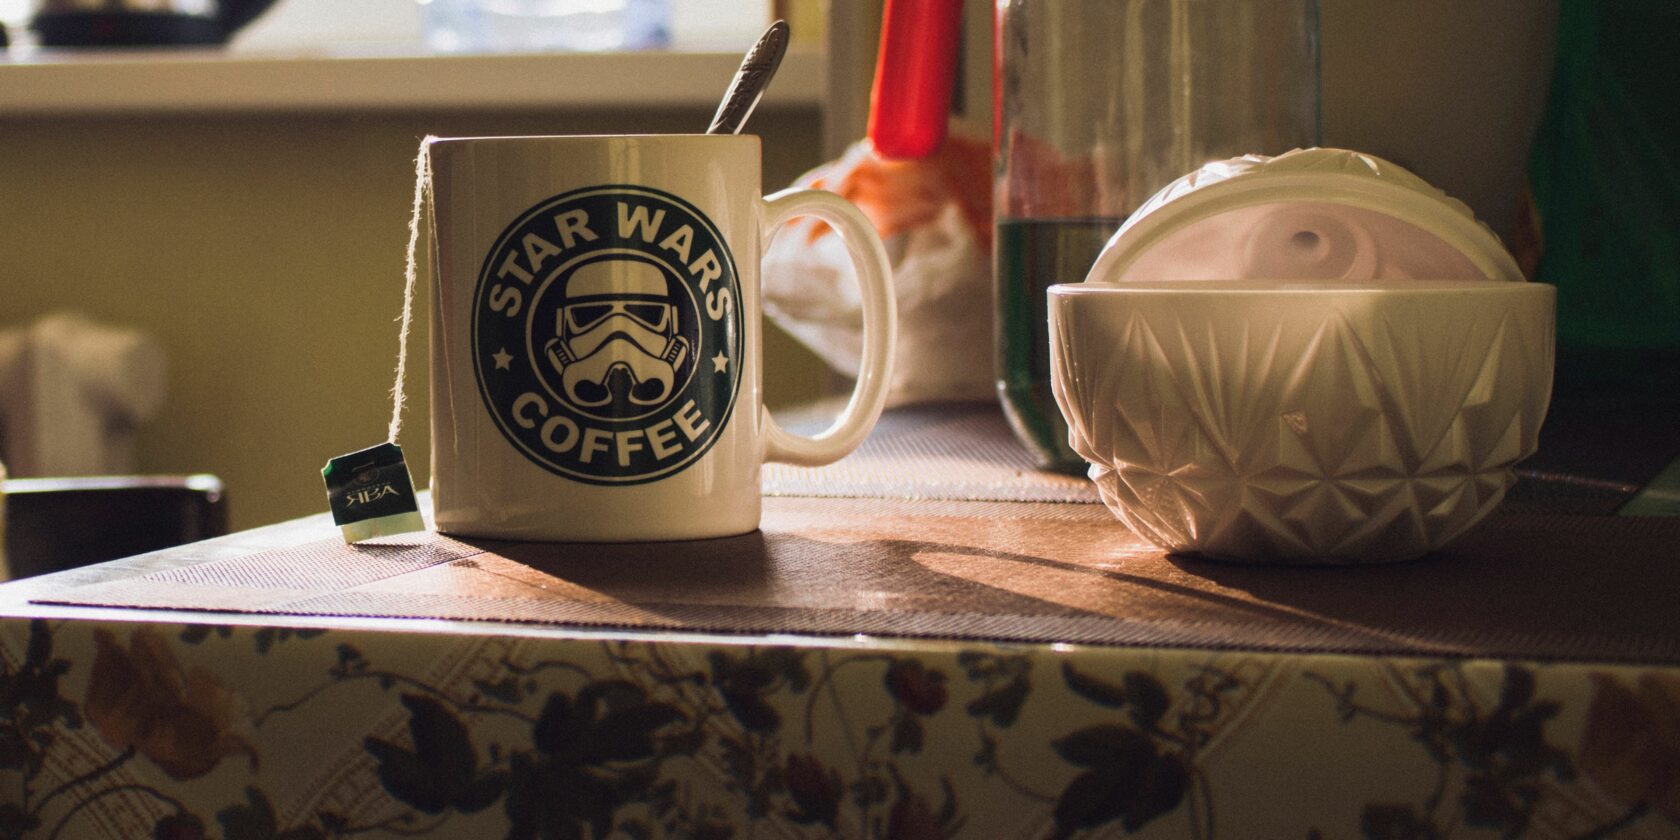 star wars collectible coffee cup